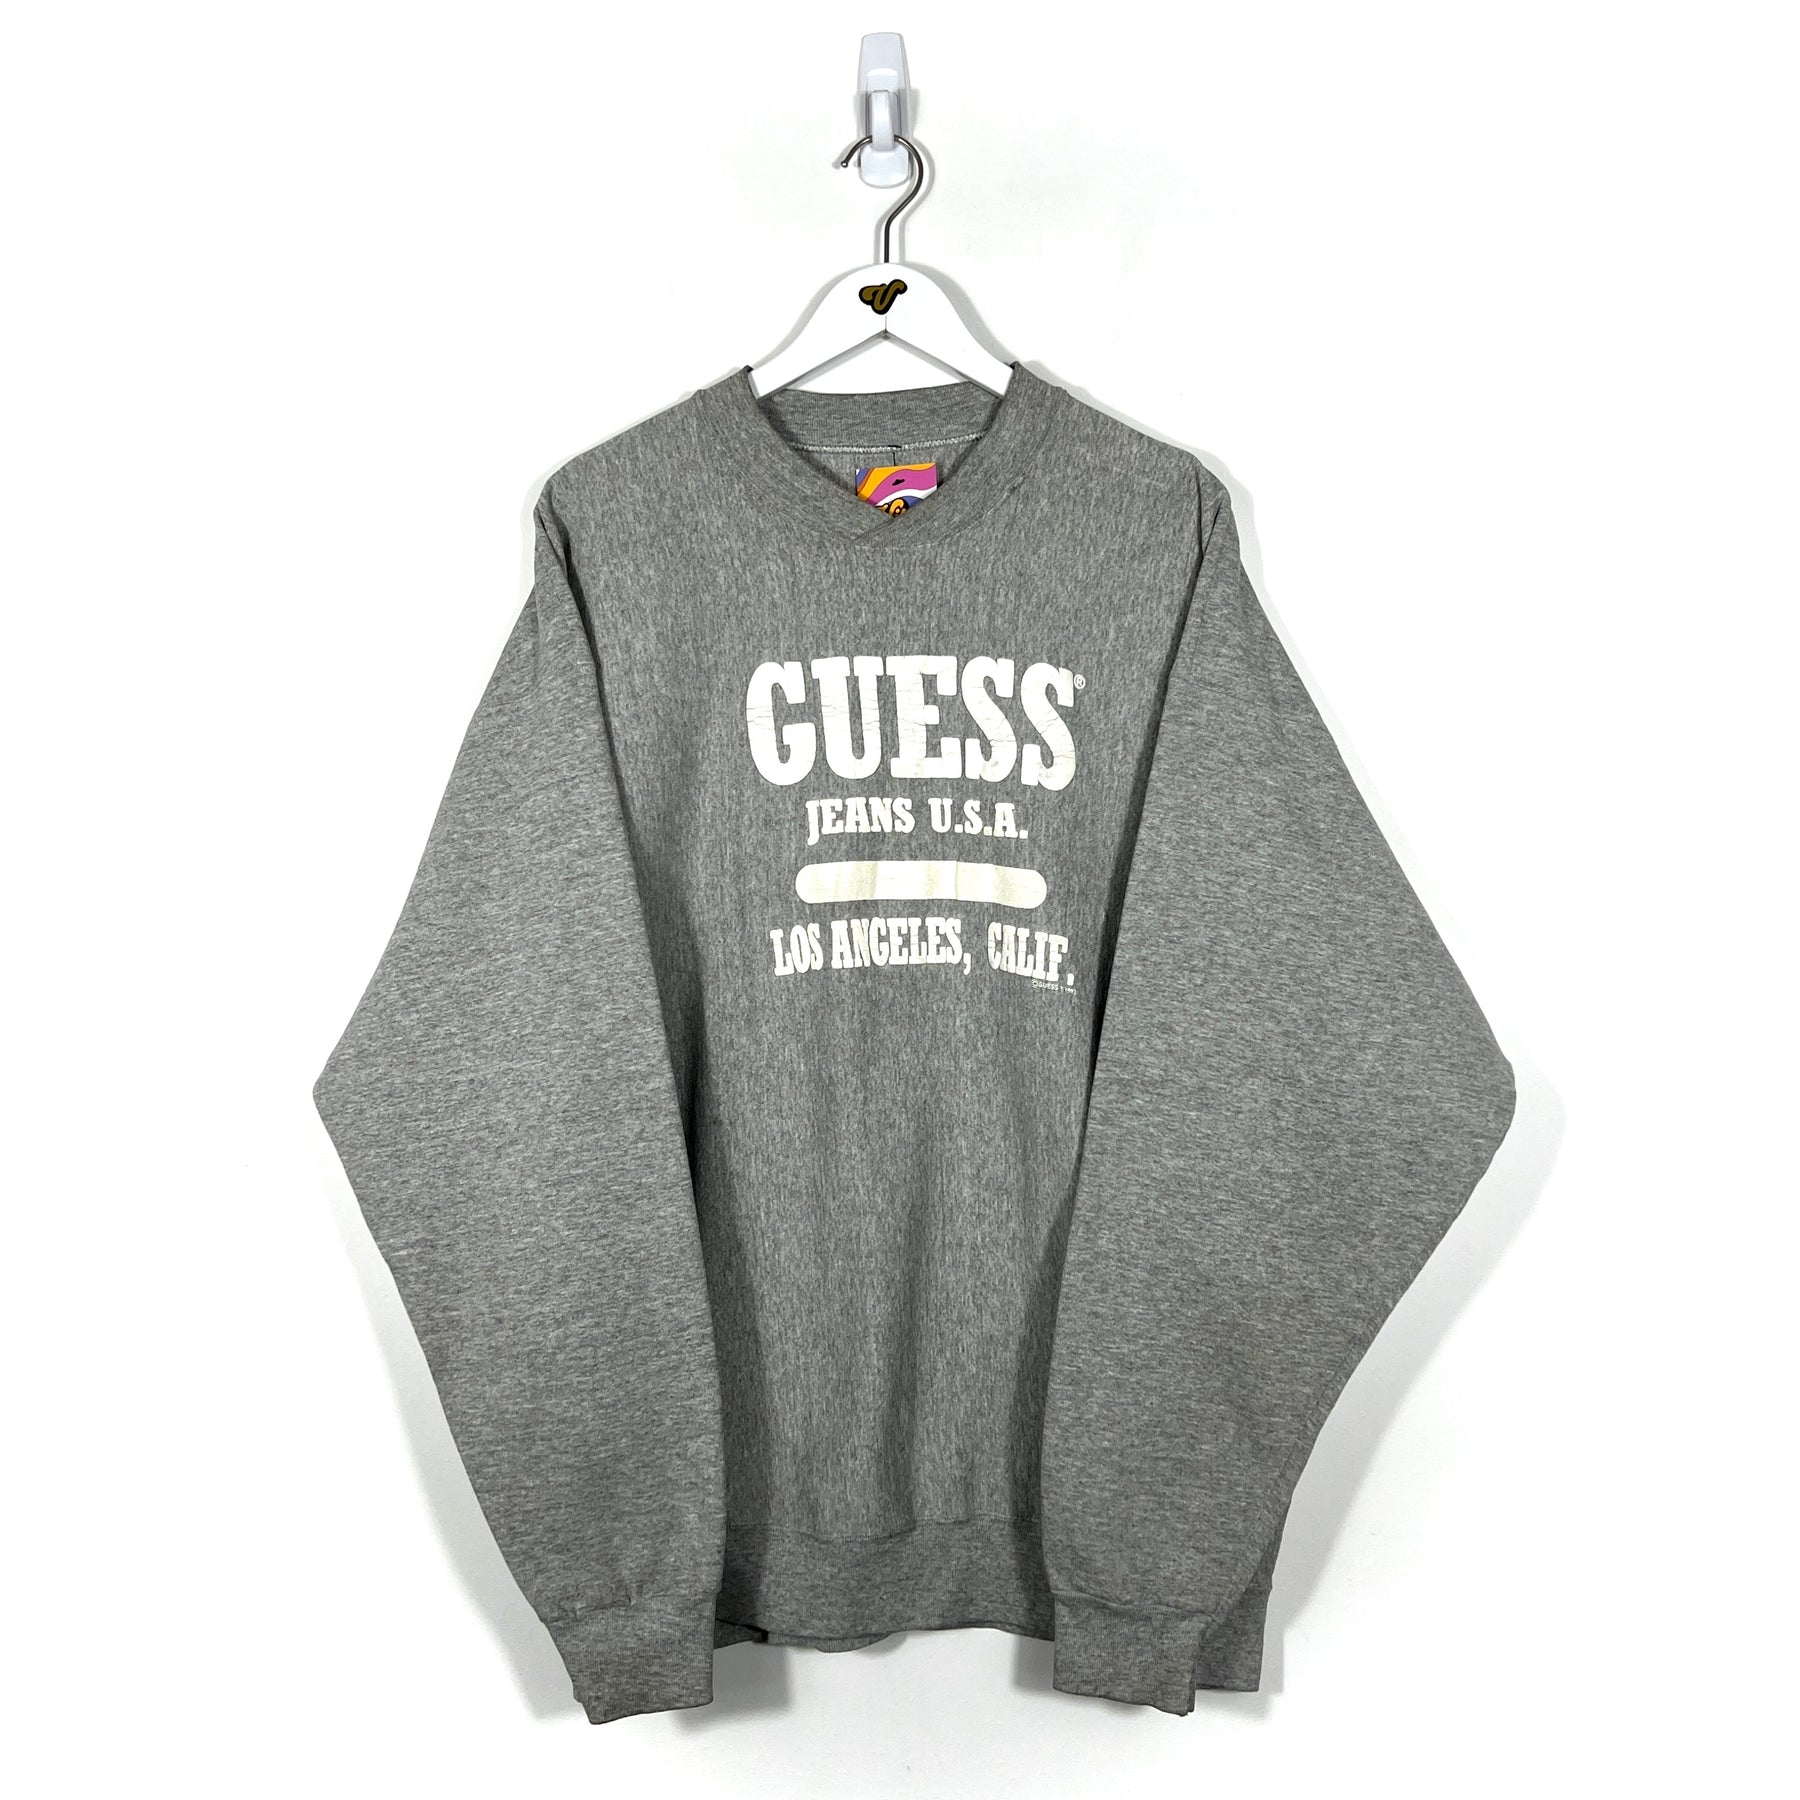 Vintage Guess Spell Out Sweatshirt - Men's Large